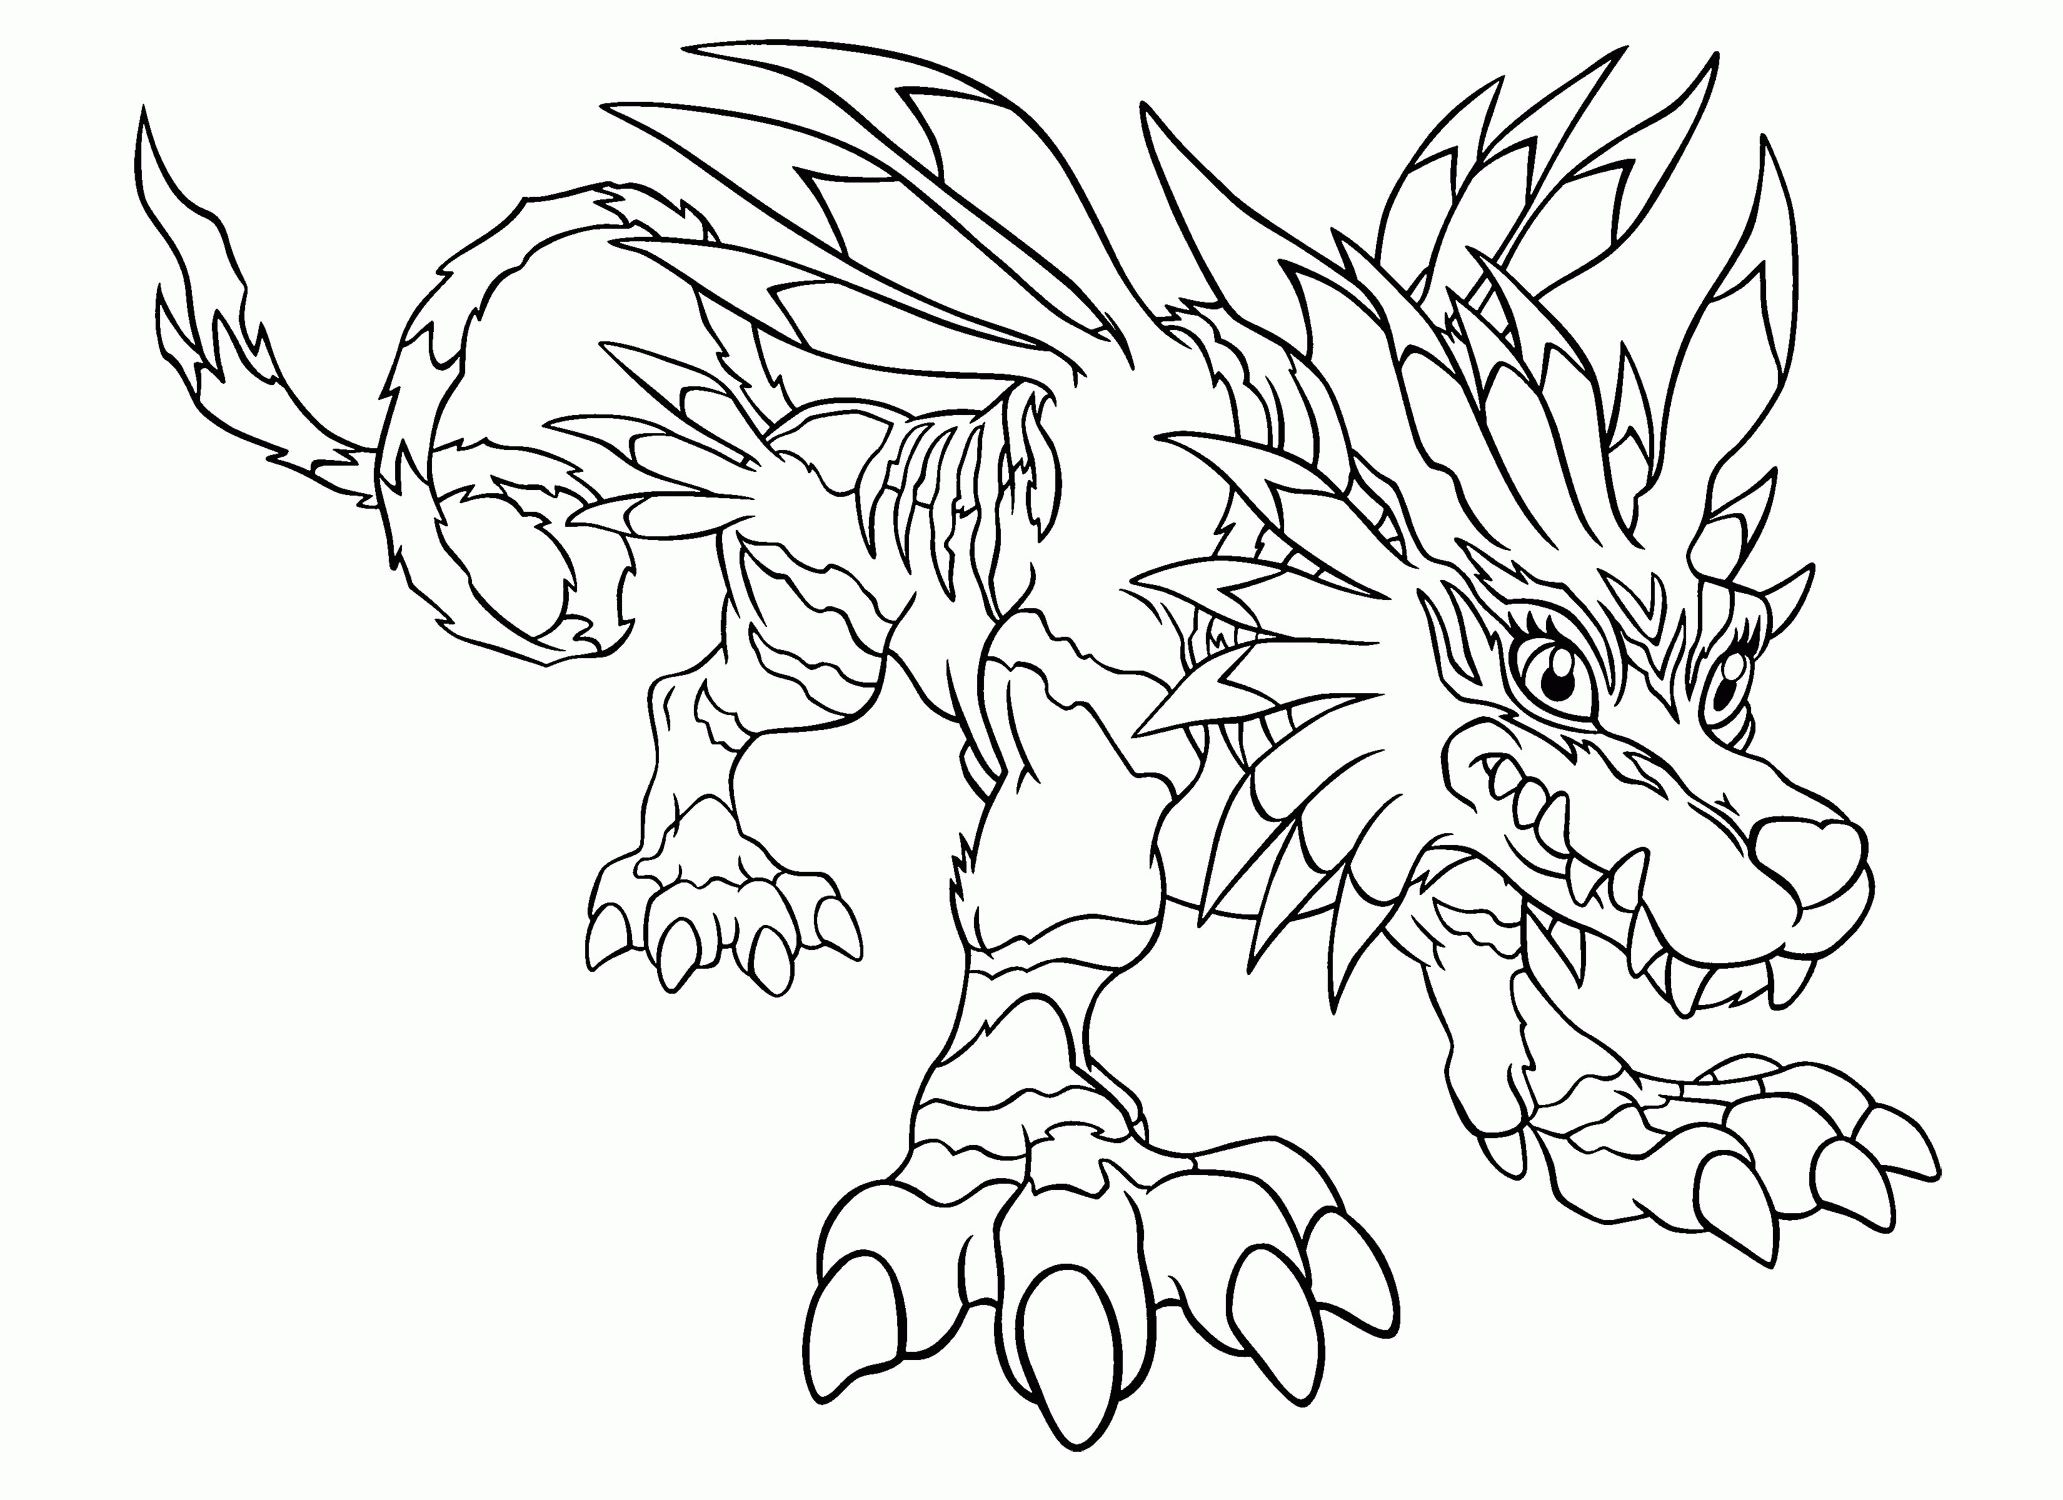 digimon-coloring-page-0001-q1